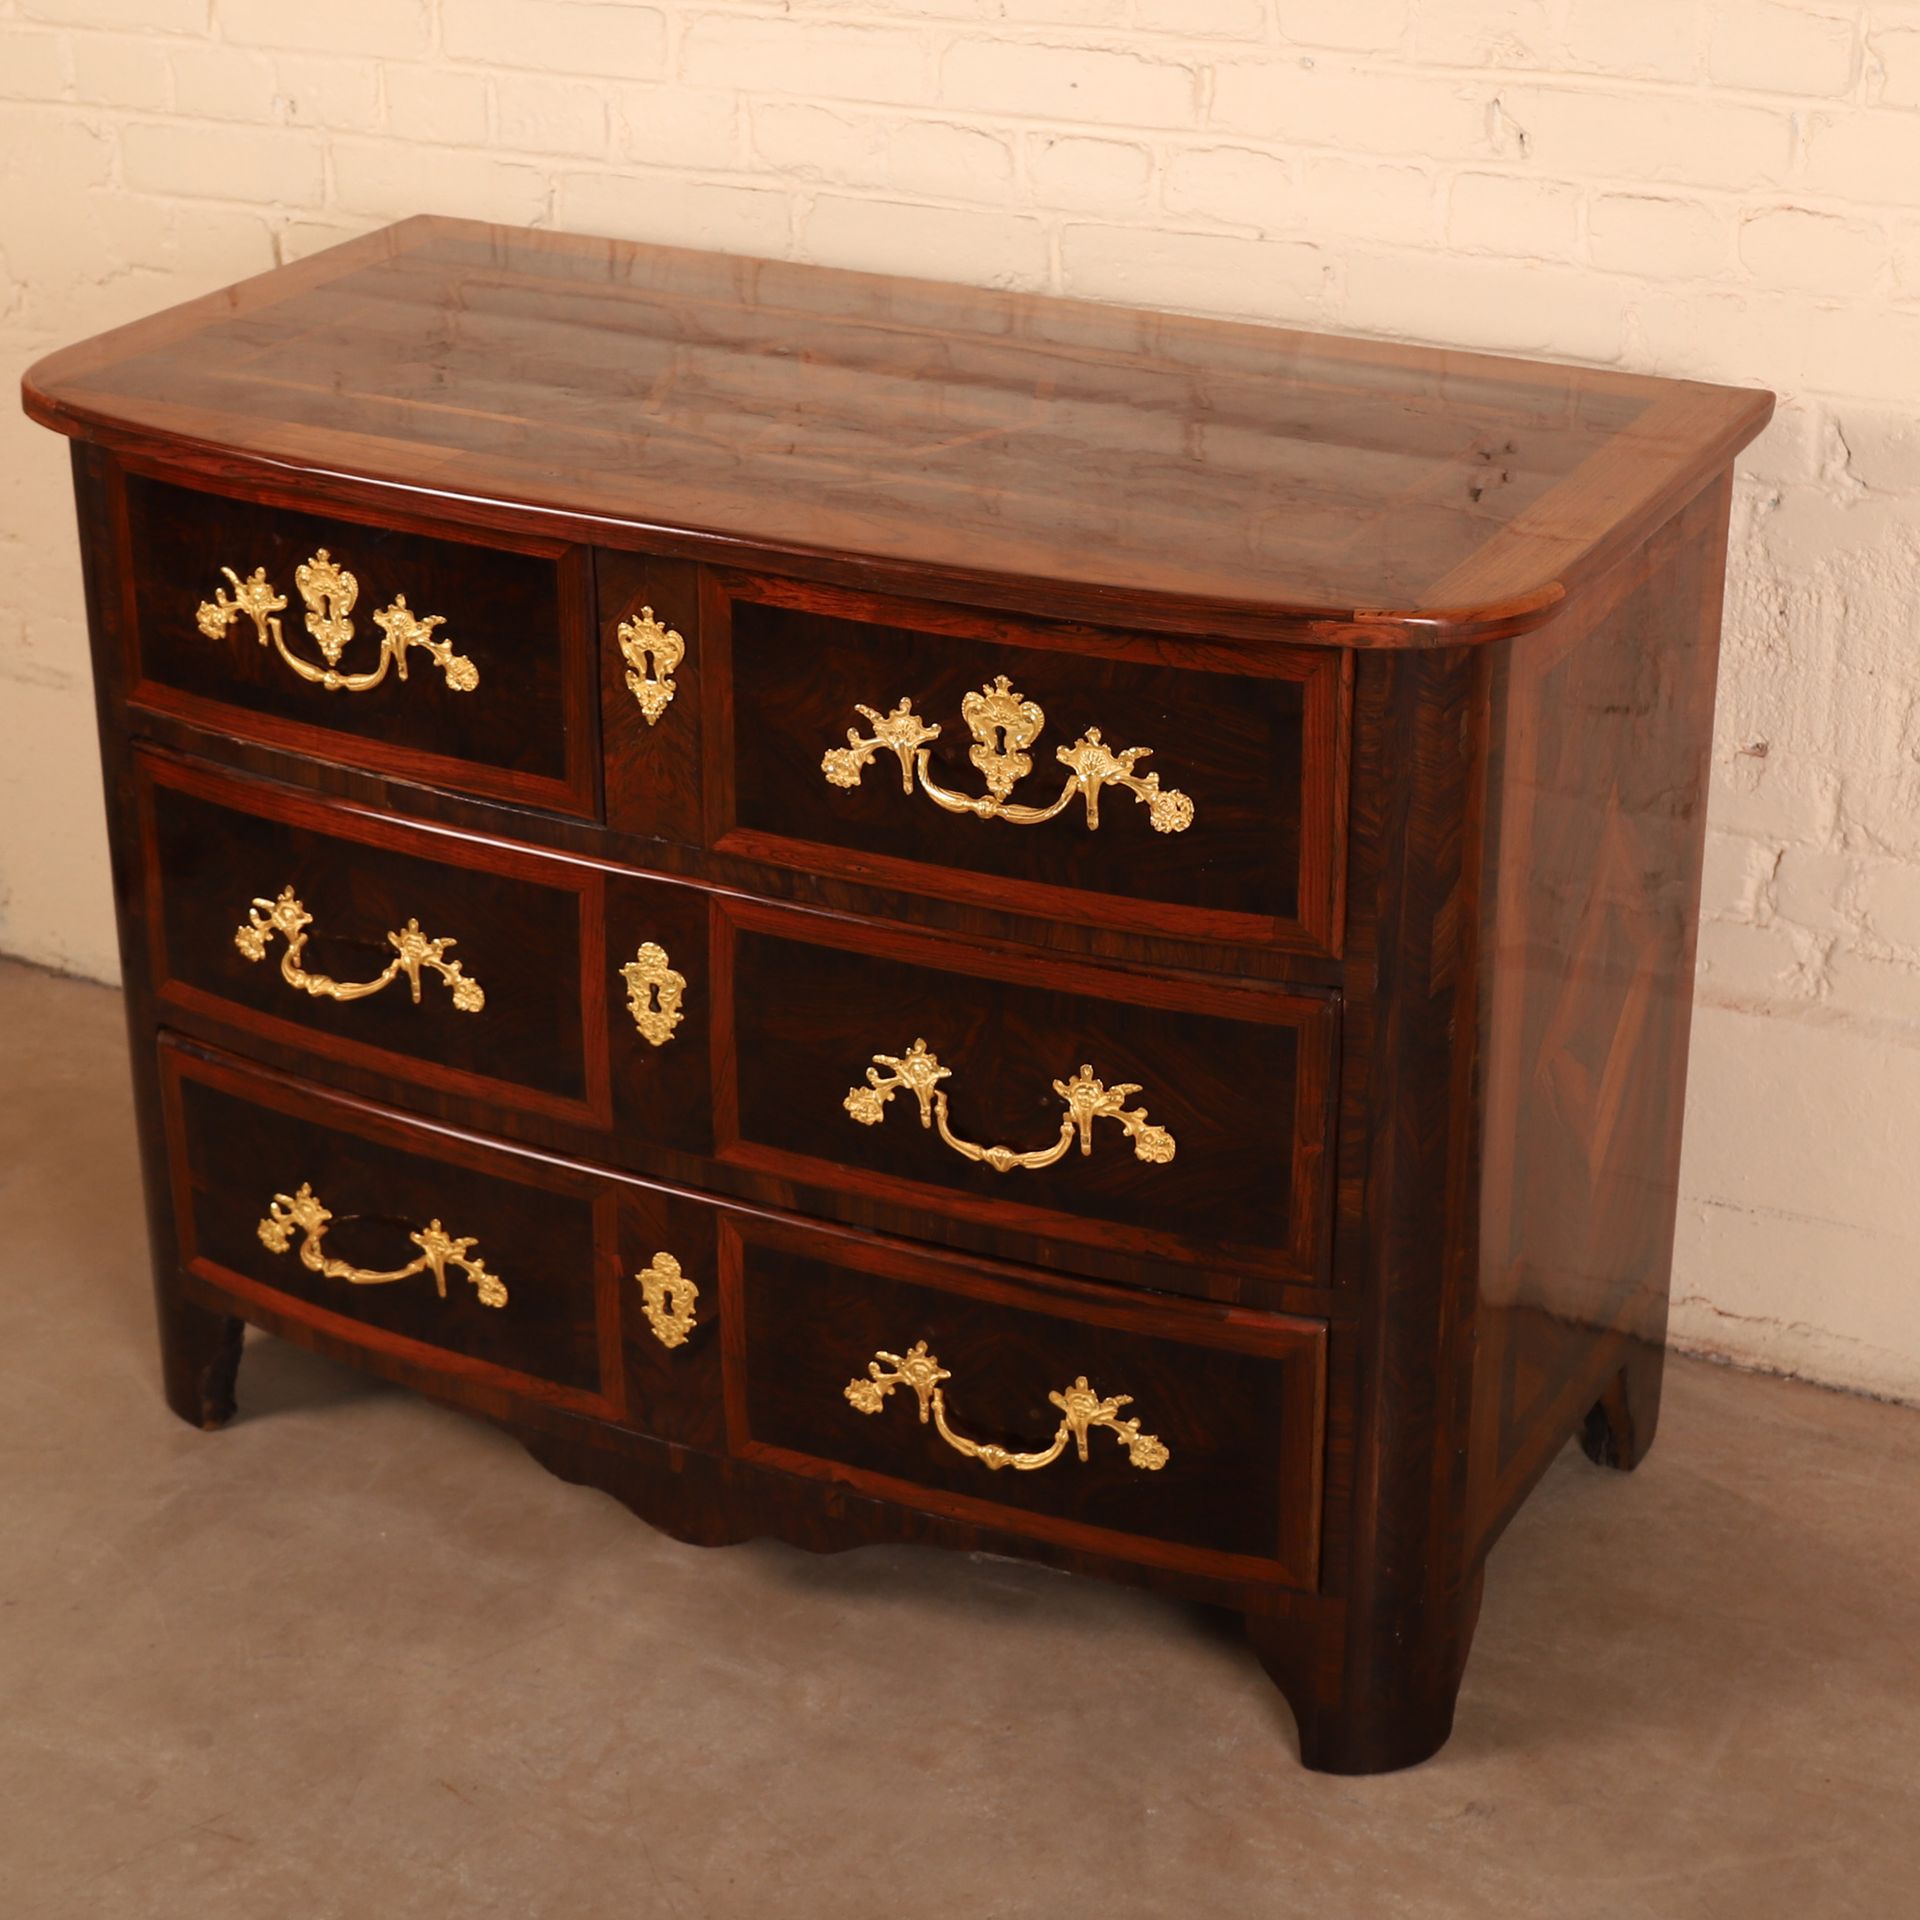 Null ELEGANT CHEST OF DRAWERS OF THE LOUIS XIV PERIOD

Opening with four drawers&hellip;